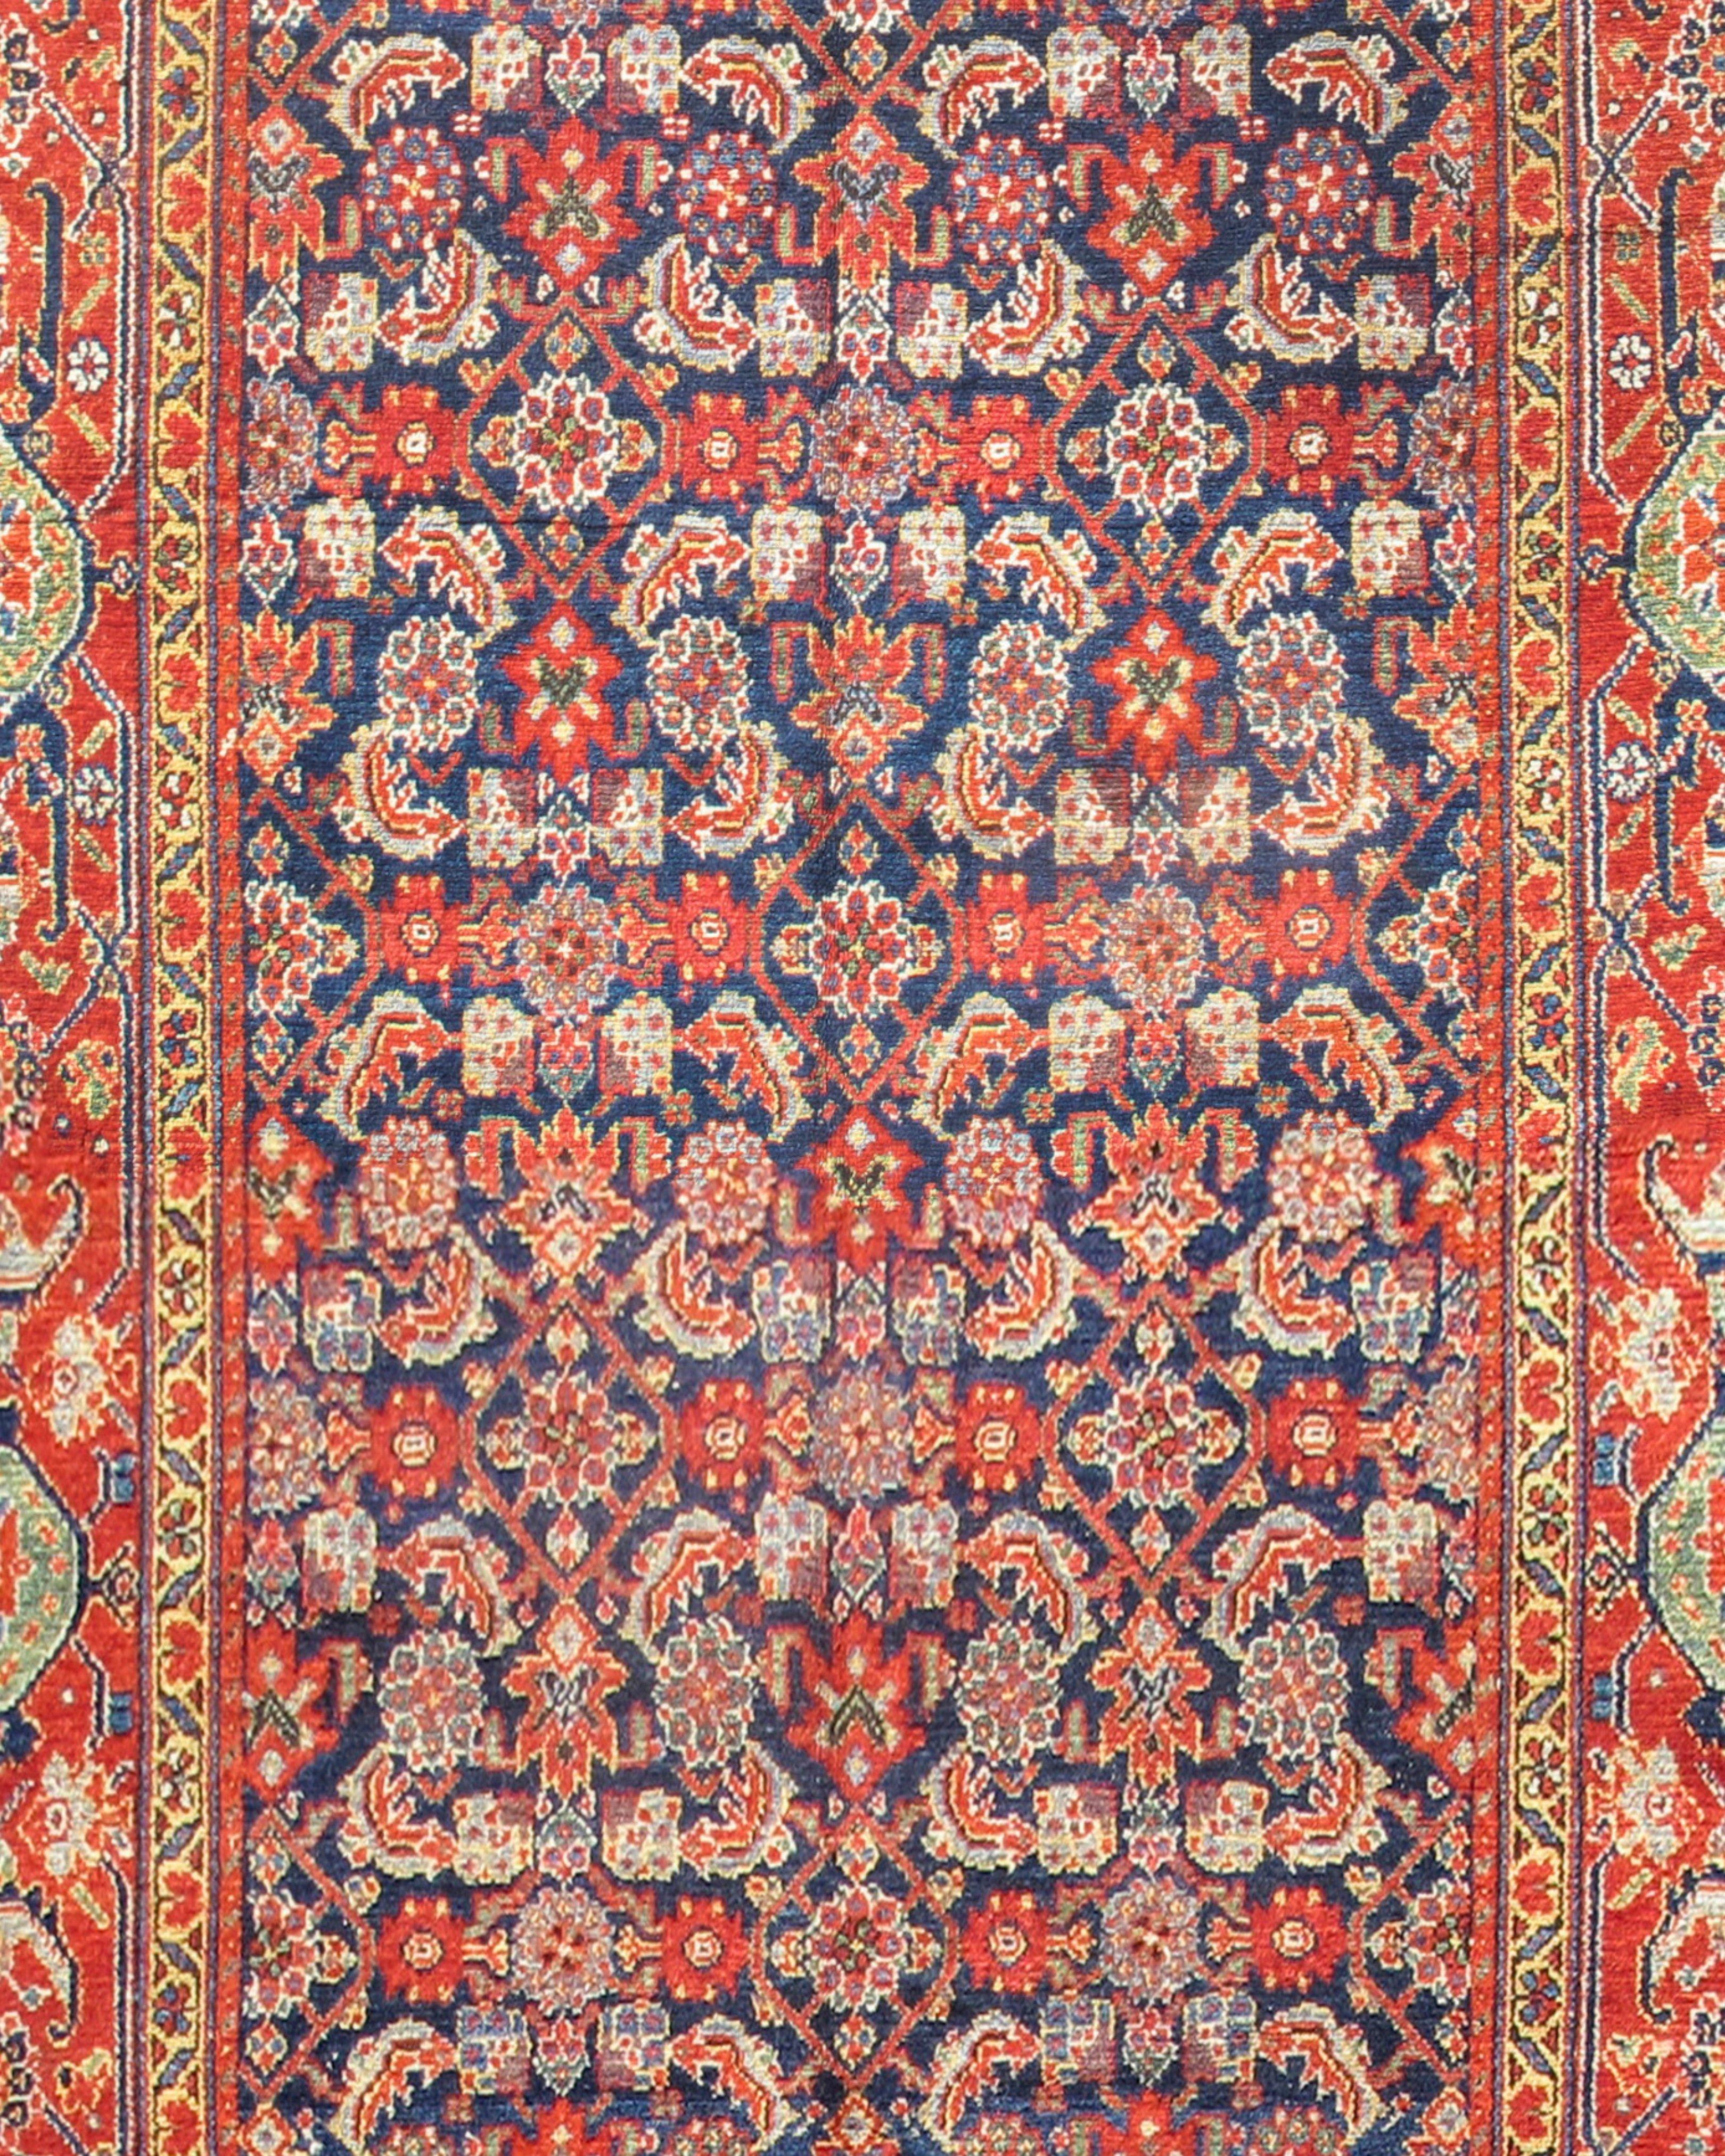 Northwest Persian Long Rug, 19th Century In Excellent Condition For Sale In San Francisco, CA